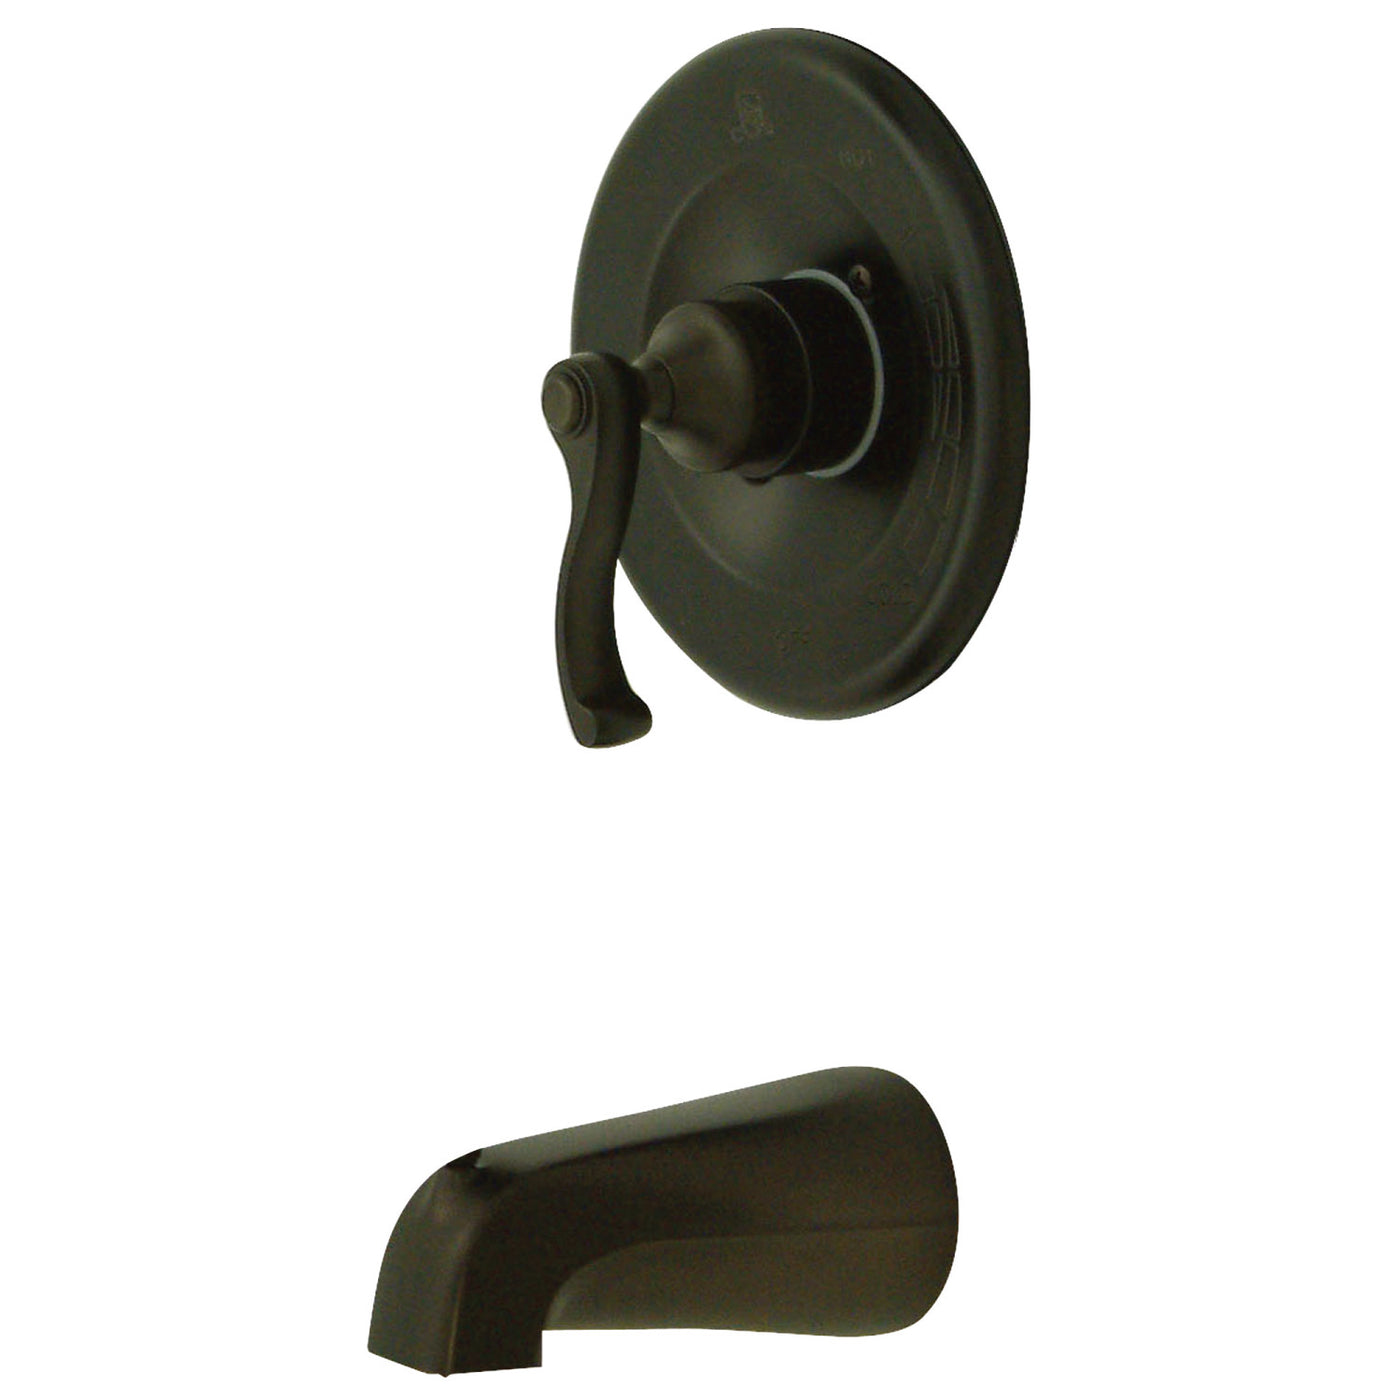 Elements of Design EB8635FLTO Tub Only Faucet, Oil Rubbed Bronze